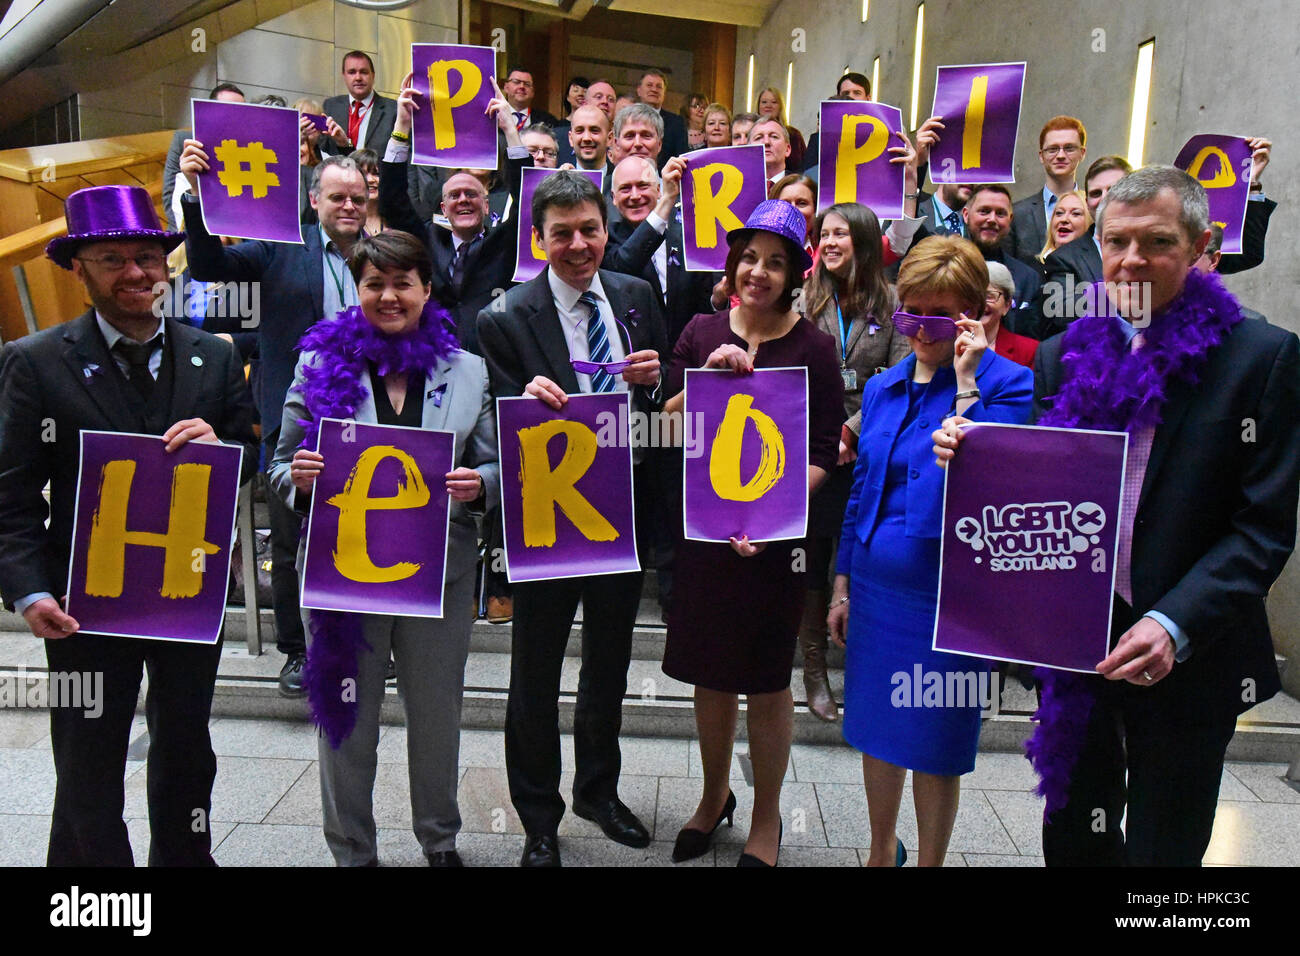 Edinburgh, Scotland, UK. 23rd Feb, 2017. First Minister Nicola Sturgeon wears purple spectacles as she joins Scottish Ministers, other party leaders, and MSPs at a photocall in the Scottish Parliament to show support for LGBTI youth ahead of "#Purple Day" Front Row L to R: Patrick Harvie, Ruth Davidson, Presiding Officer Ken Macintosh, Kezia Dugdale, Nicola Sturgeon, Willie Rennie Credit: Ken Jack/Alamy Live News Stock Photo